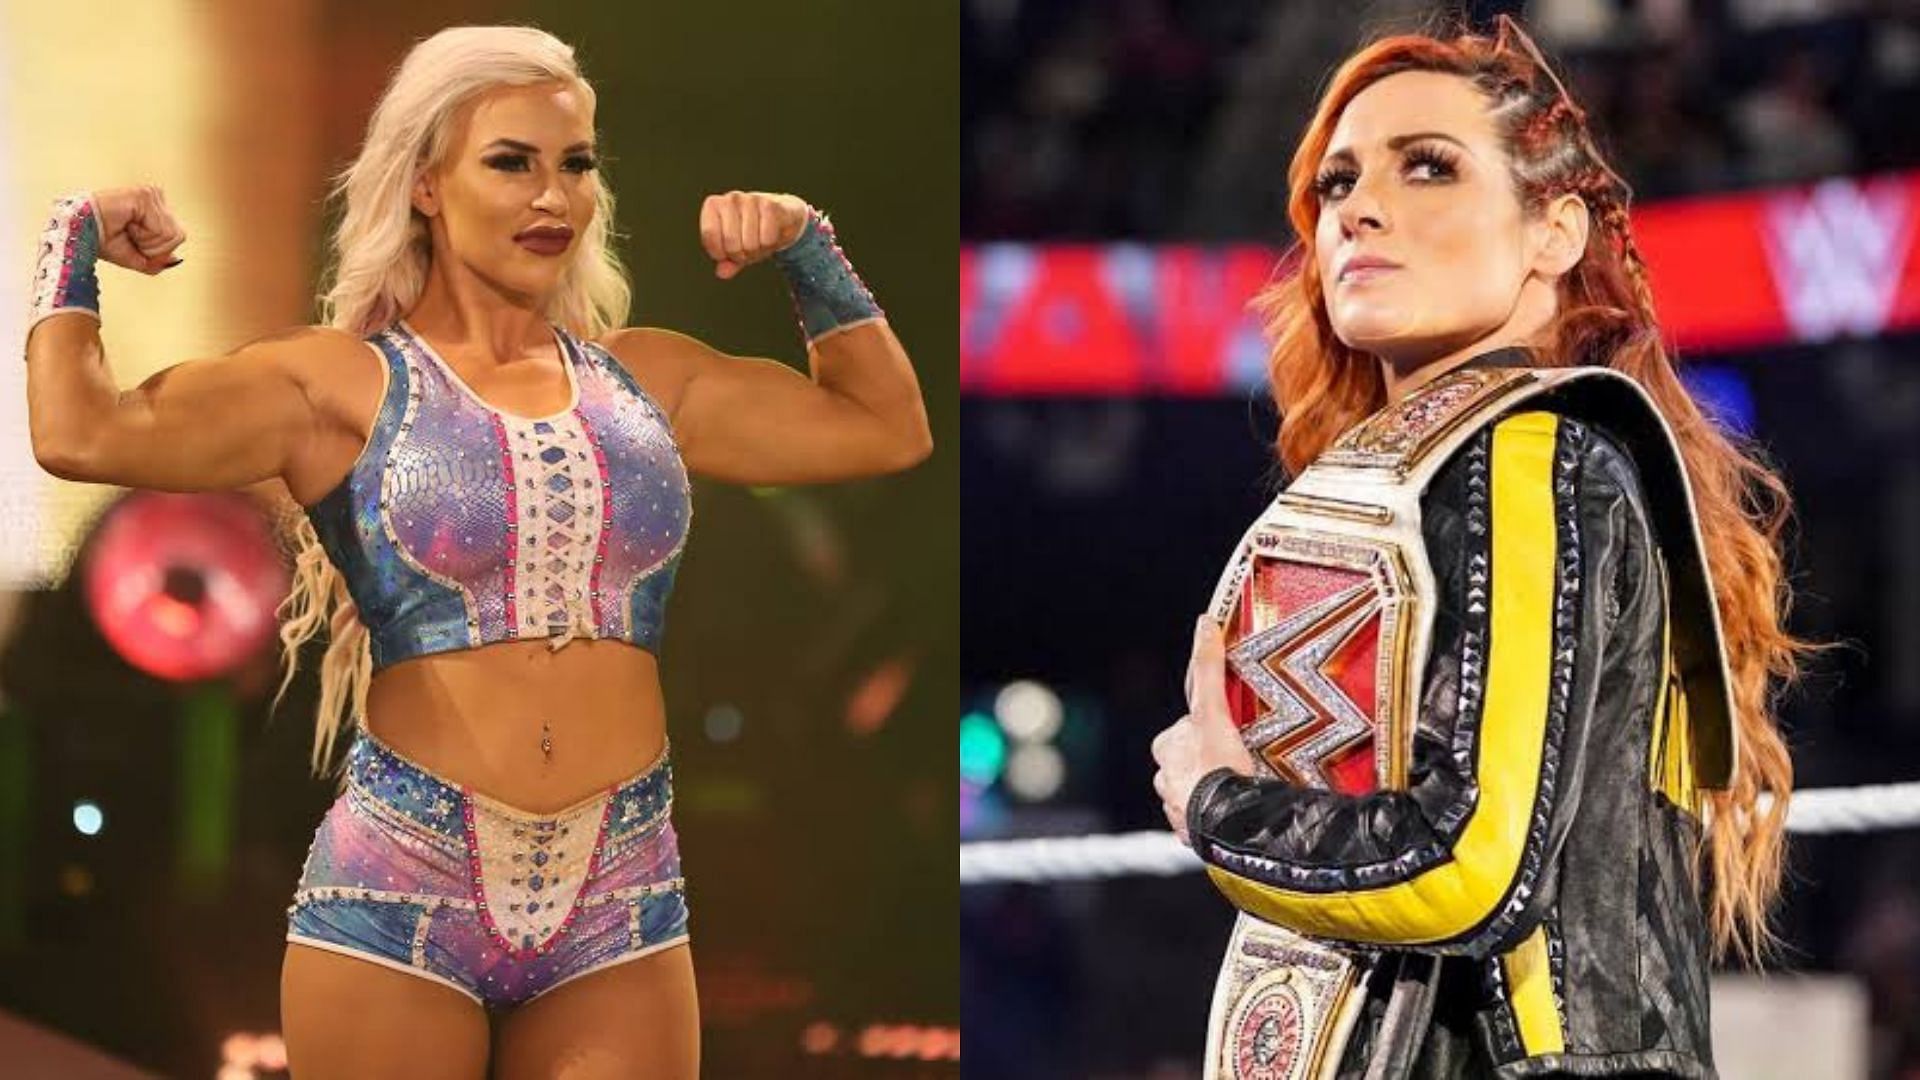 Dana Brooke has sent a message to Becky Lynch after beating her on RAW